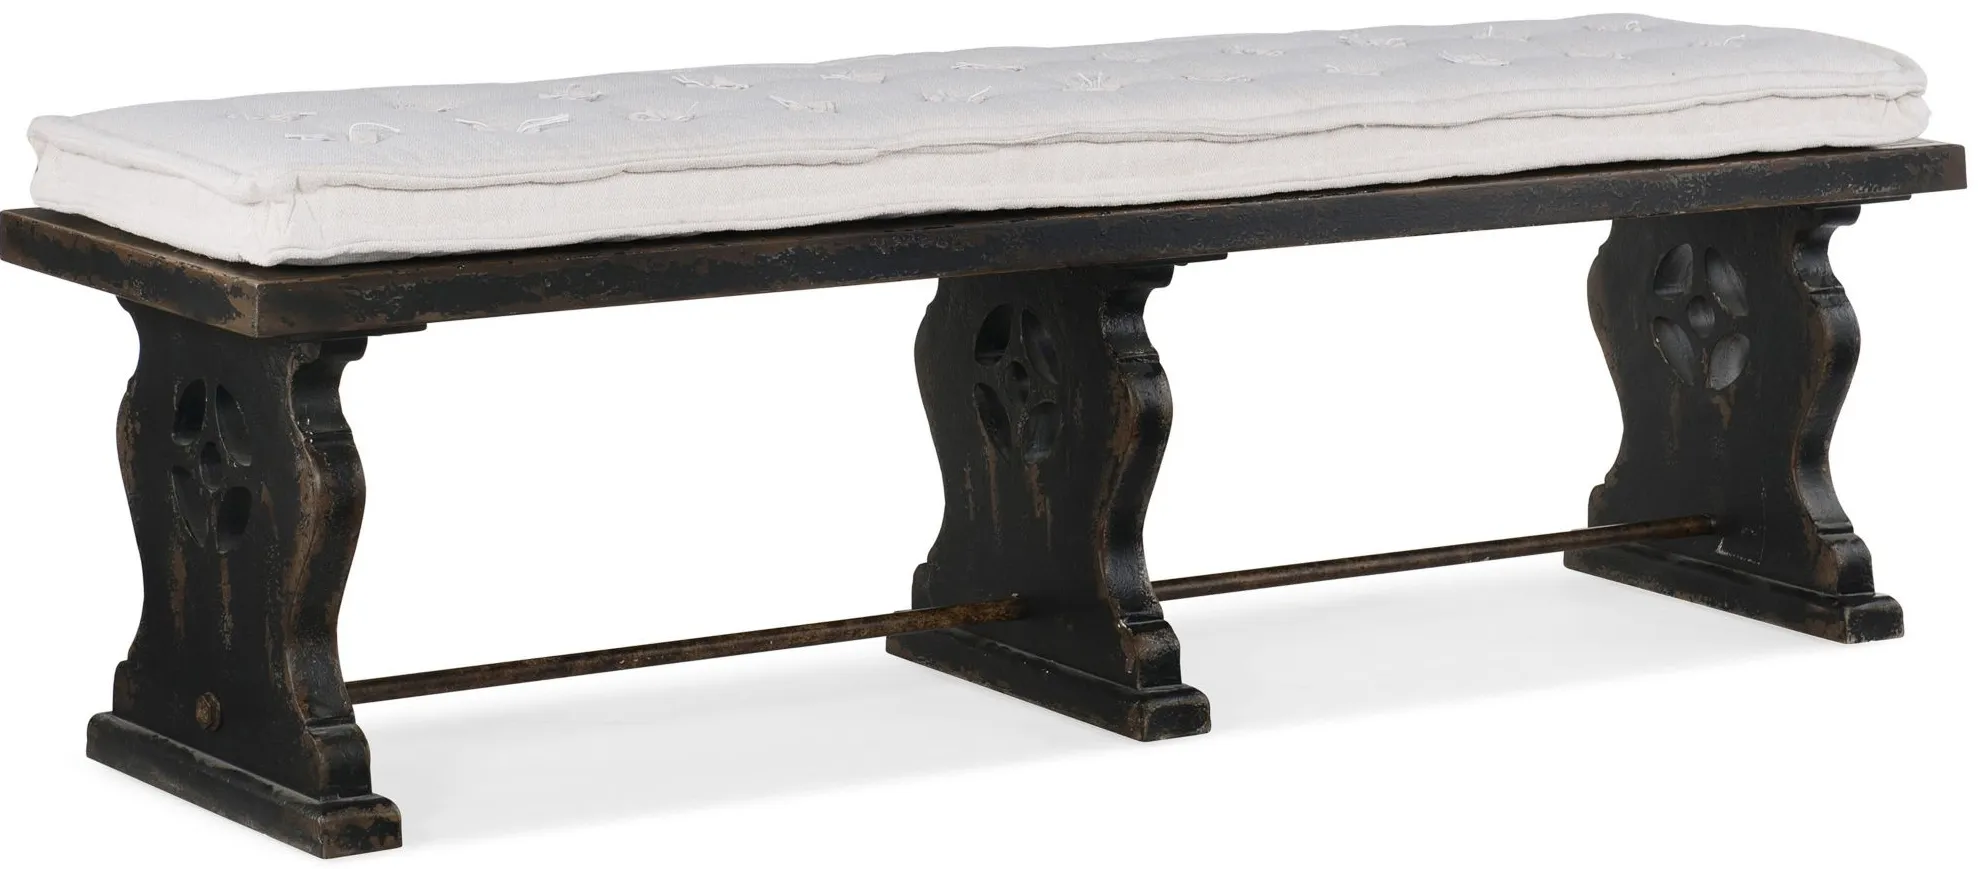 Ciao Bella Bench in Black by Hooker Furniture